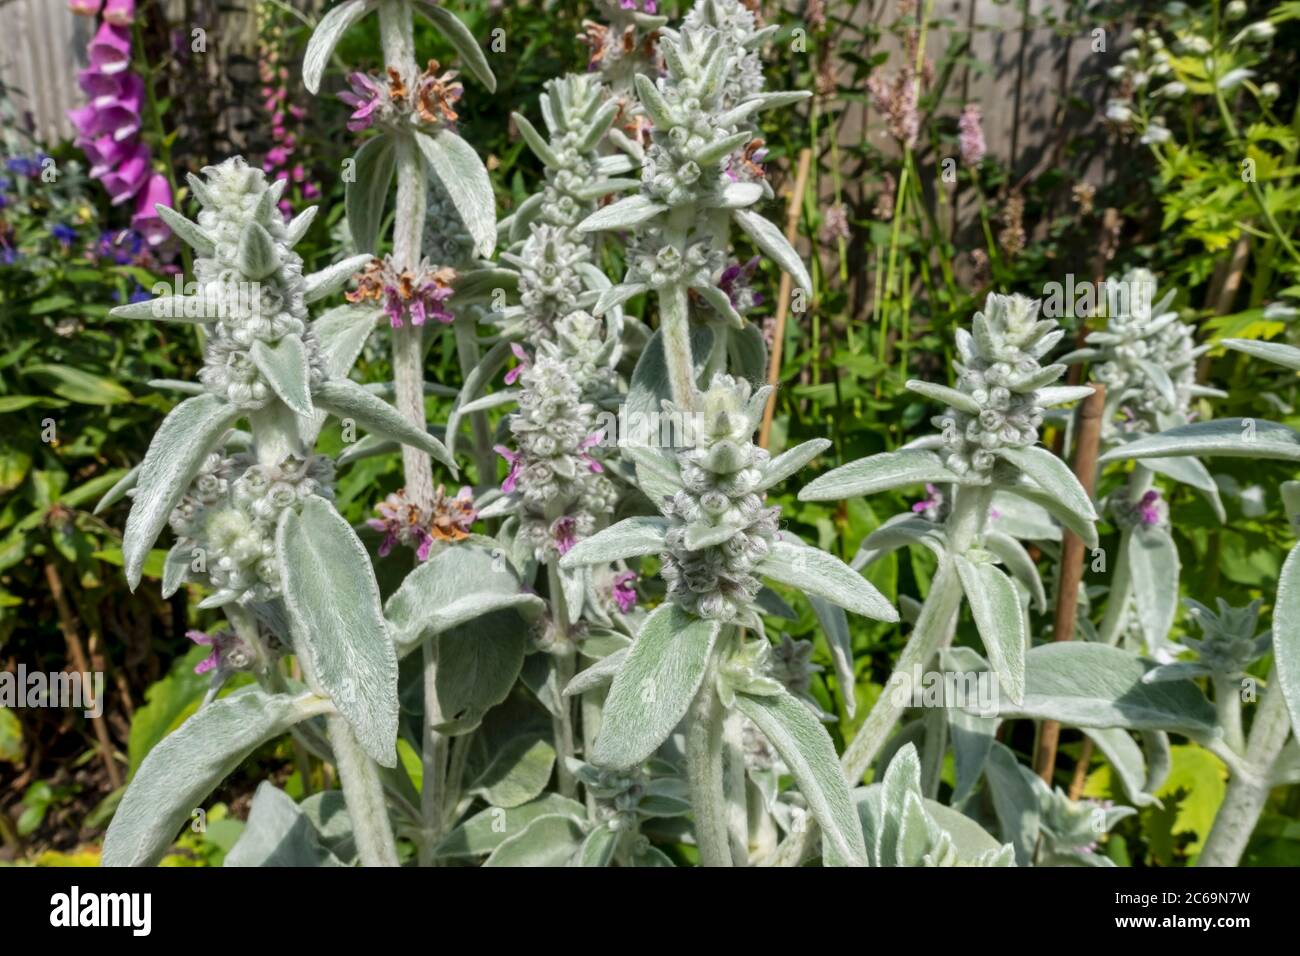 Close up of Lambs ear 'Silver Carpet' flowers (Stachys byzantina) in the garden in summer England UK United Kingdom GB Great Britain Stock Photo